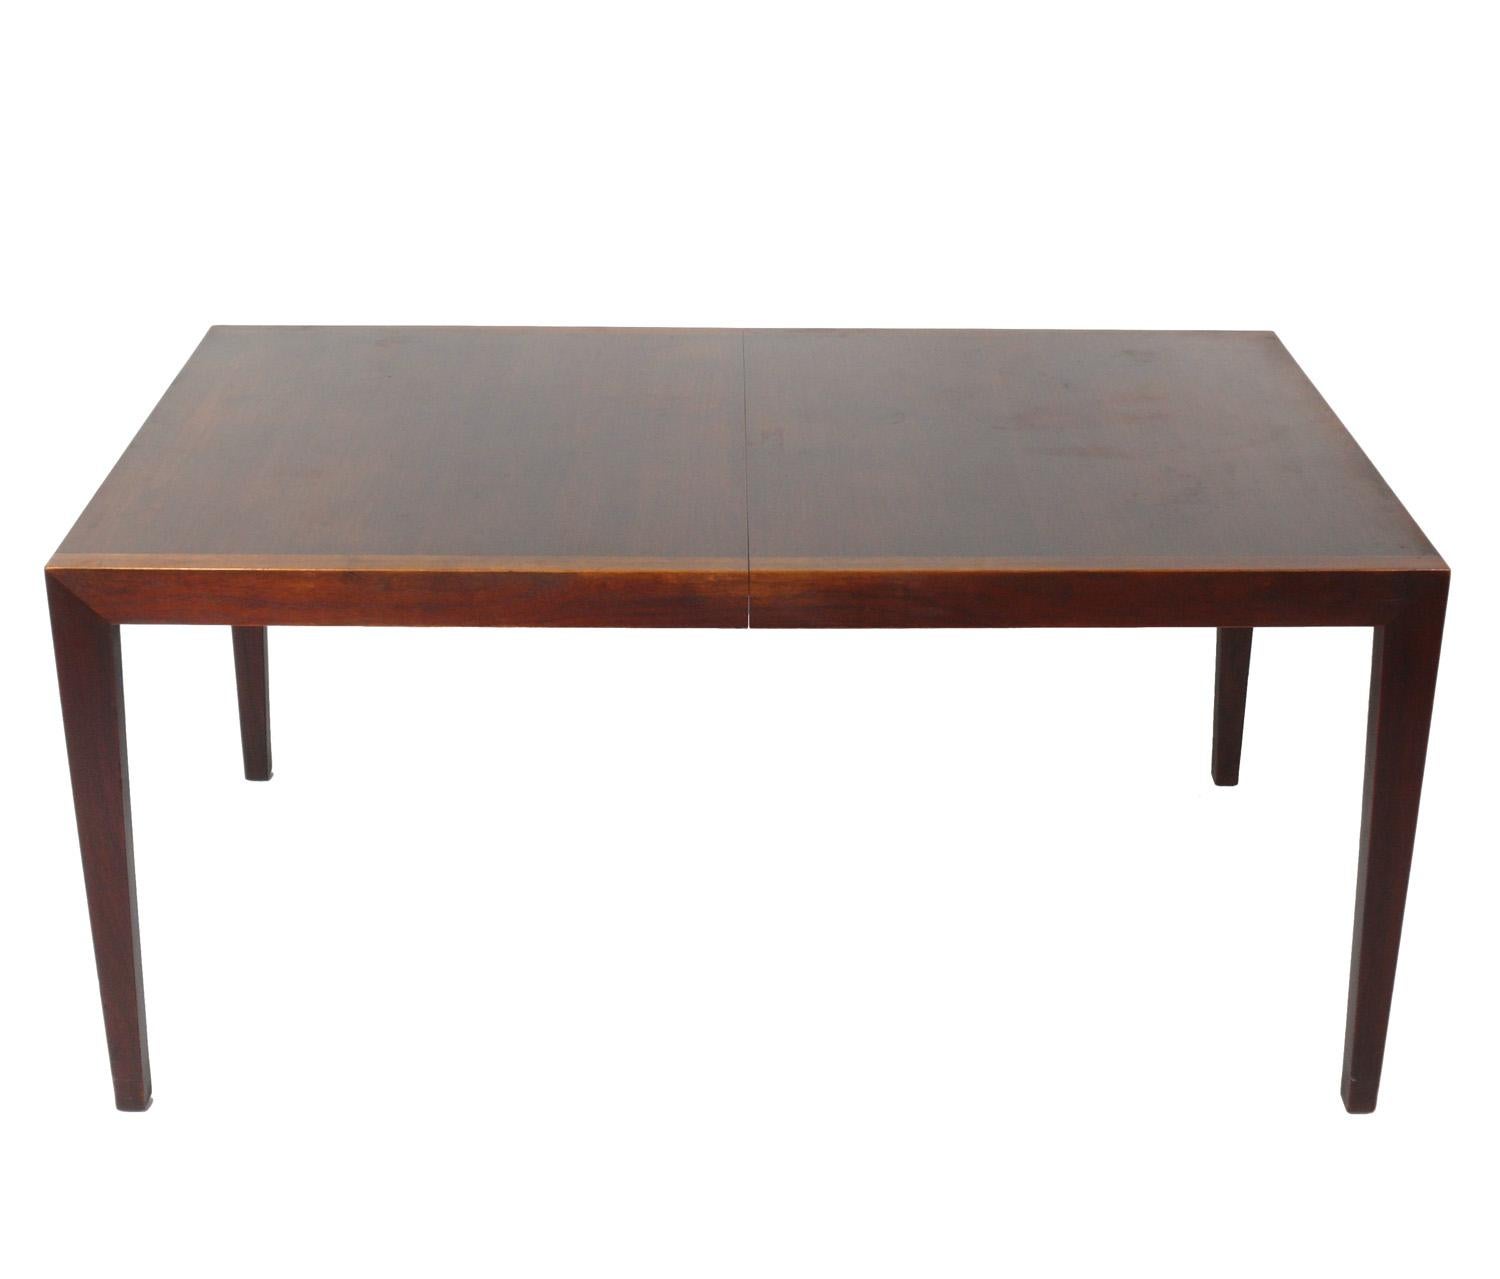 Clean lined walnut dining table, designed by Florence Knoll for Knoll, American, circa 1950s. Signed with early Knoll label underneath. It has been cleaned and Danish oiled. It measures an impressive 60